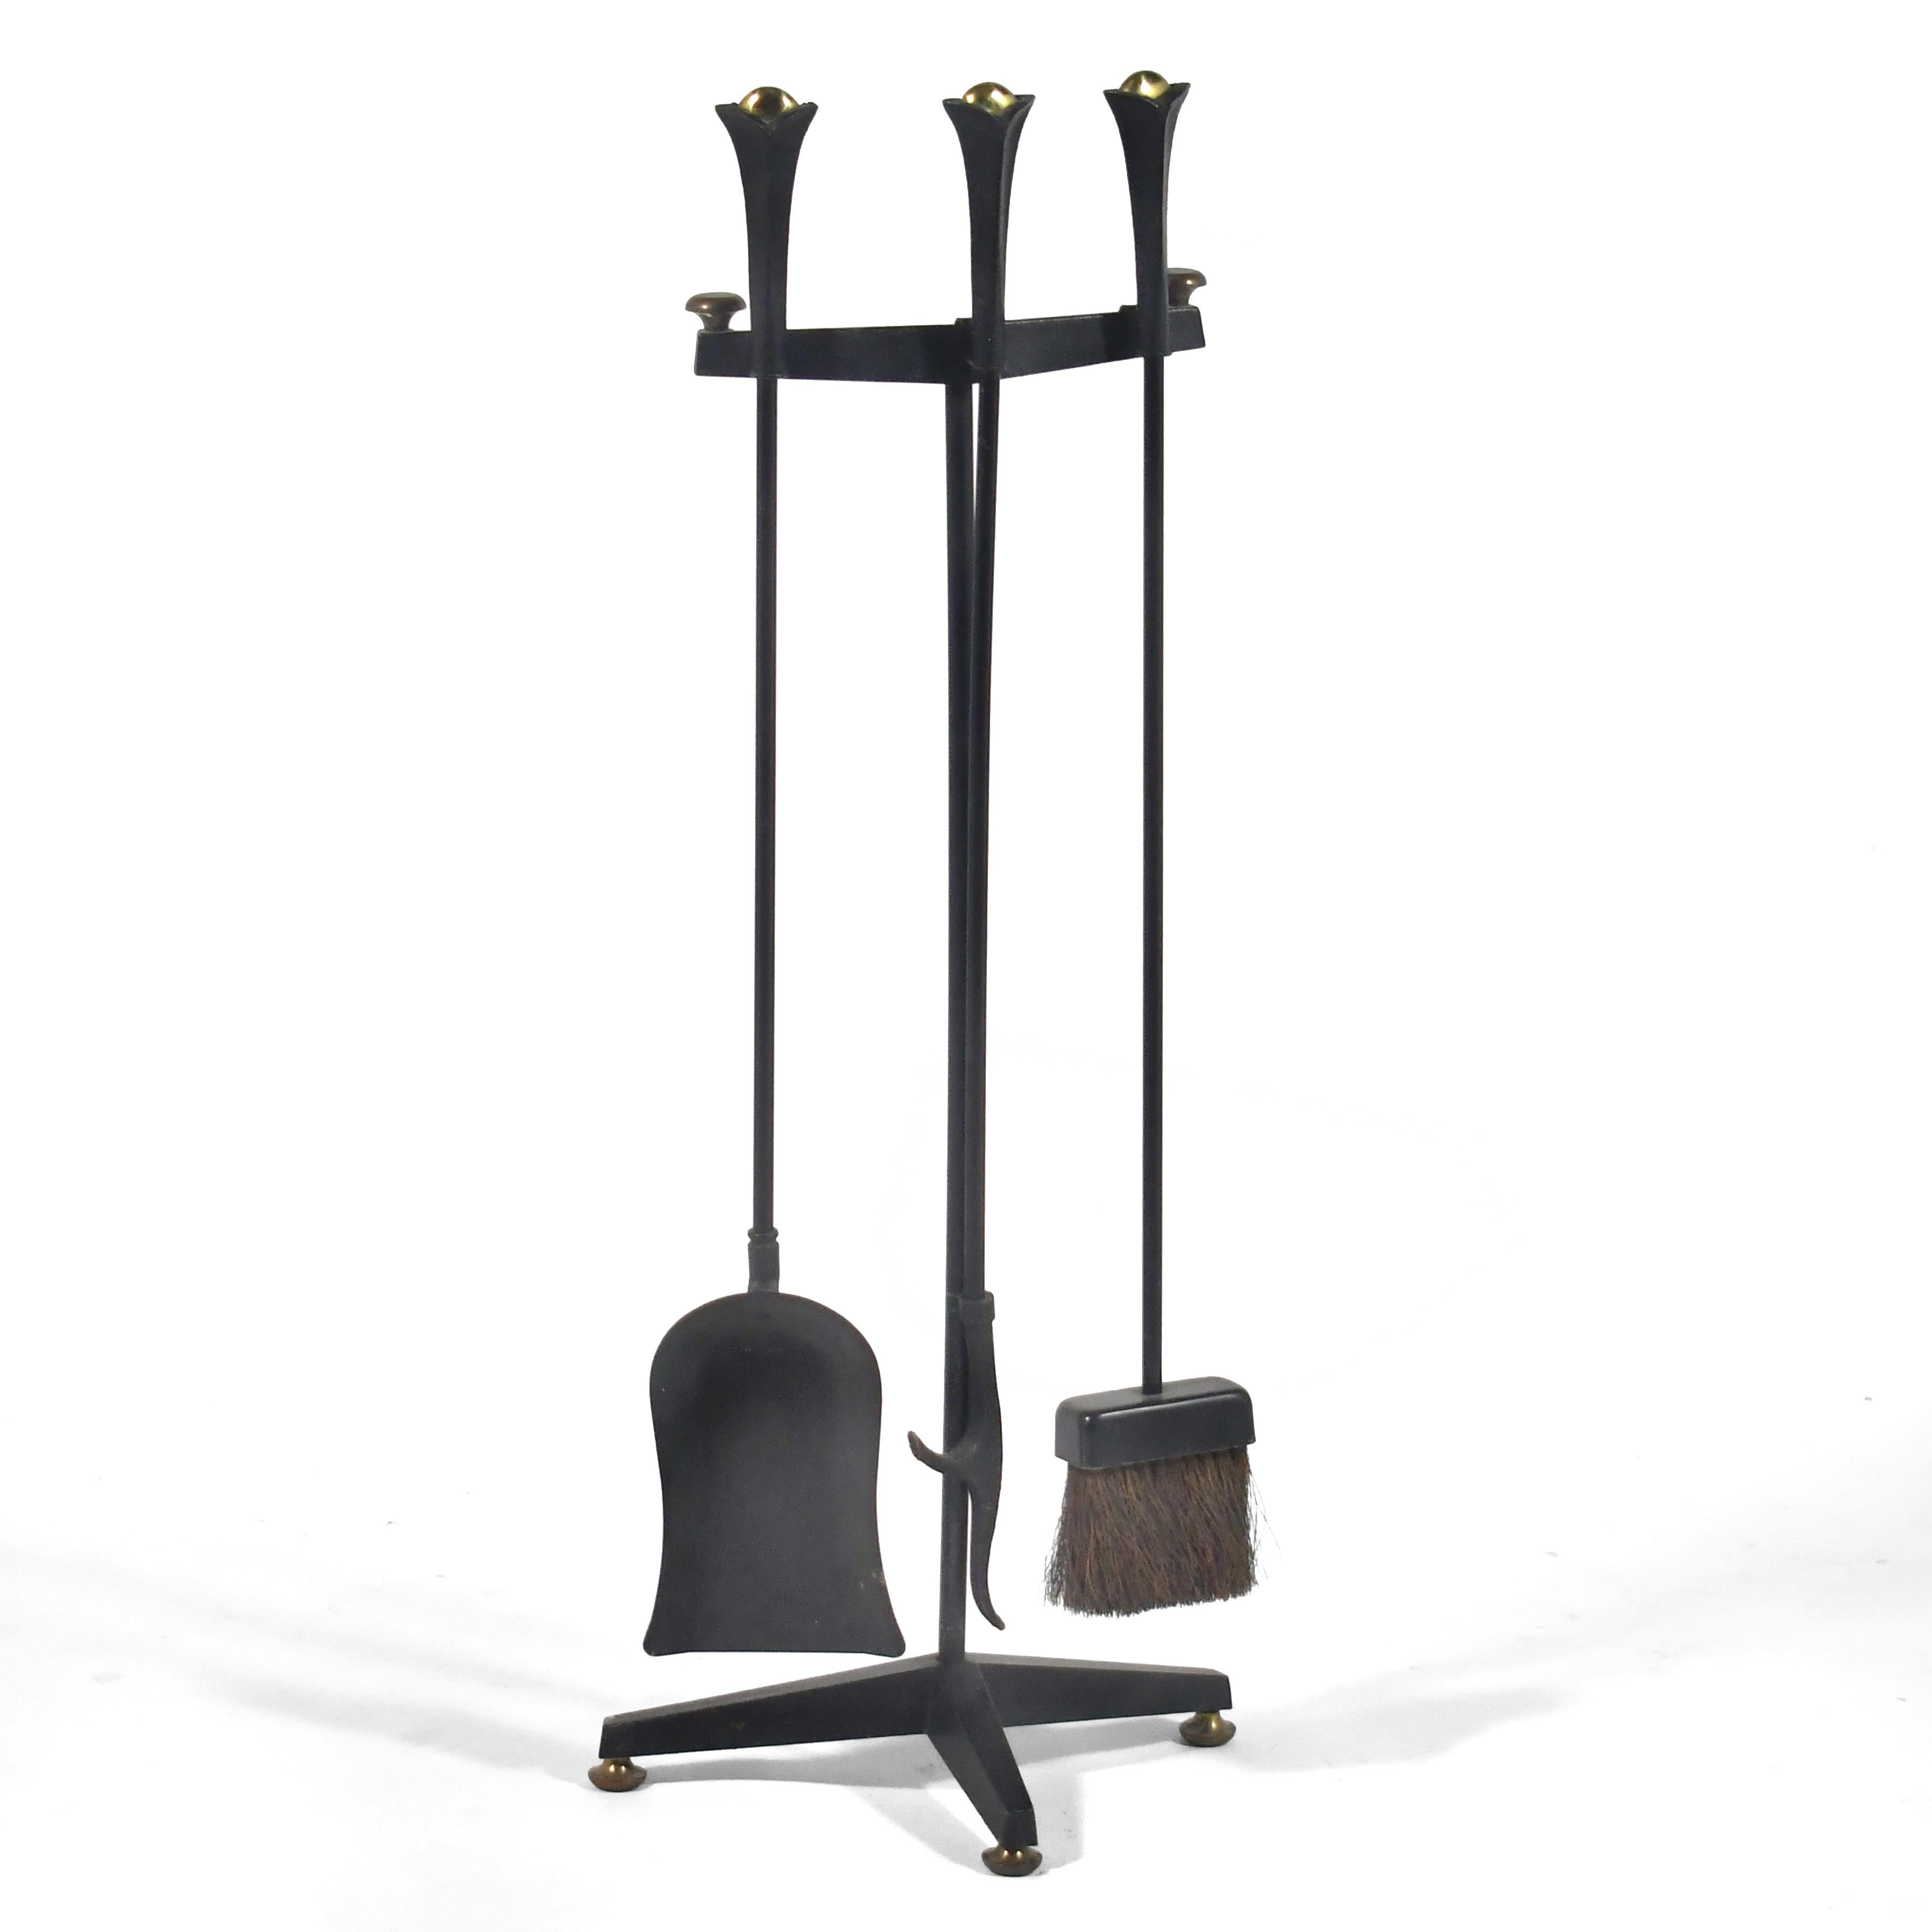 This four piece set of Donald Deskey fire tools by Bennett includes a poker, broom, shovel and stand/ holder. The black iron is accented by brass details.

33.5